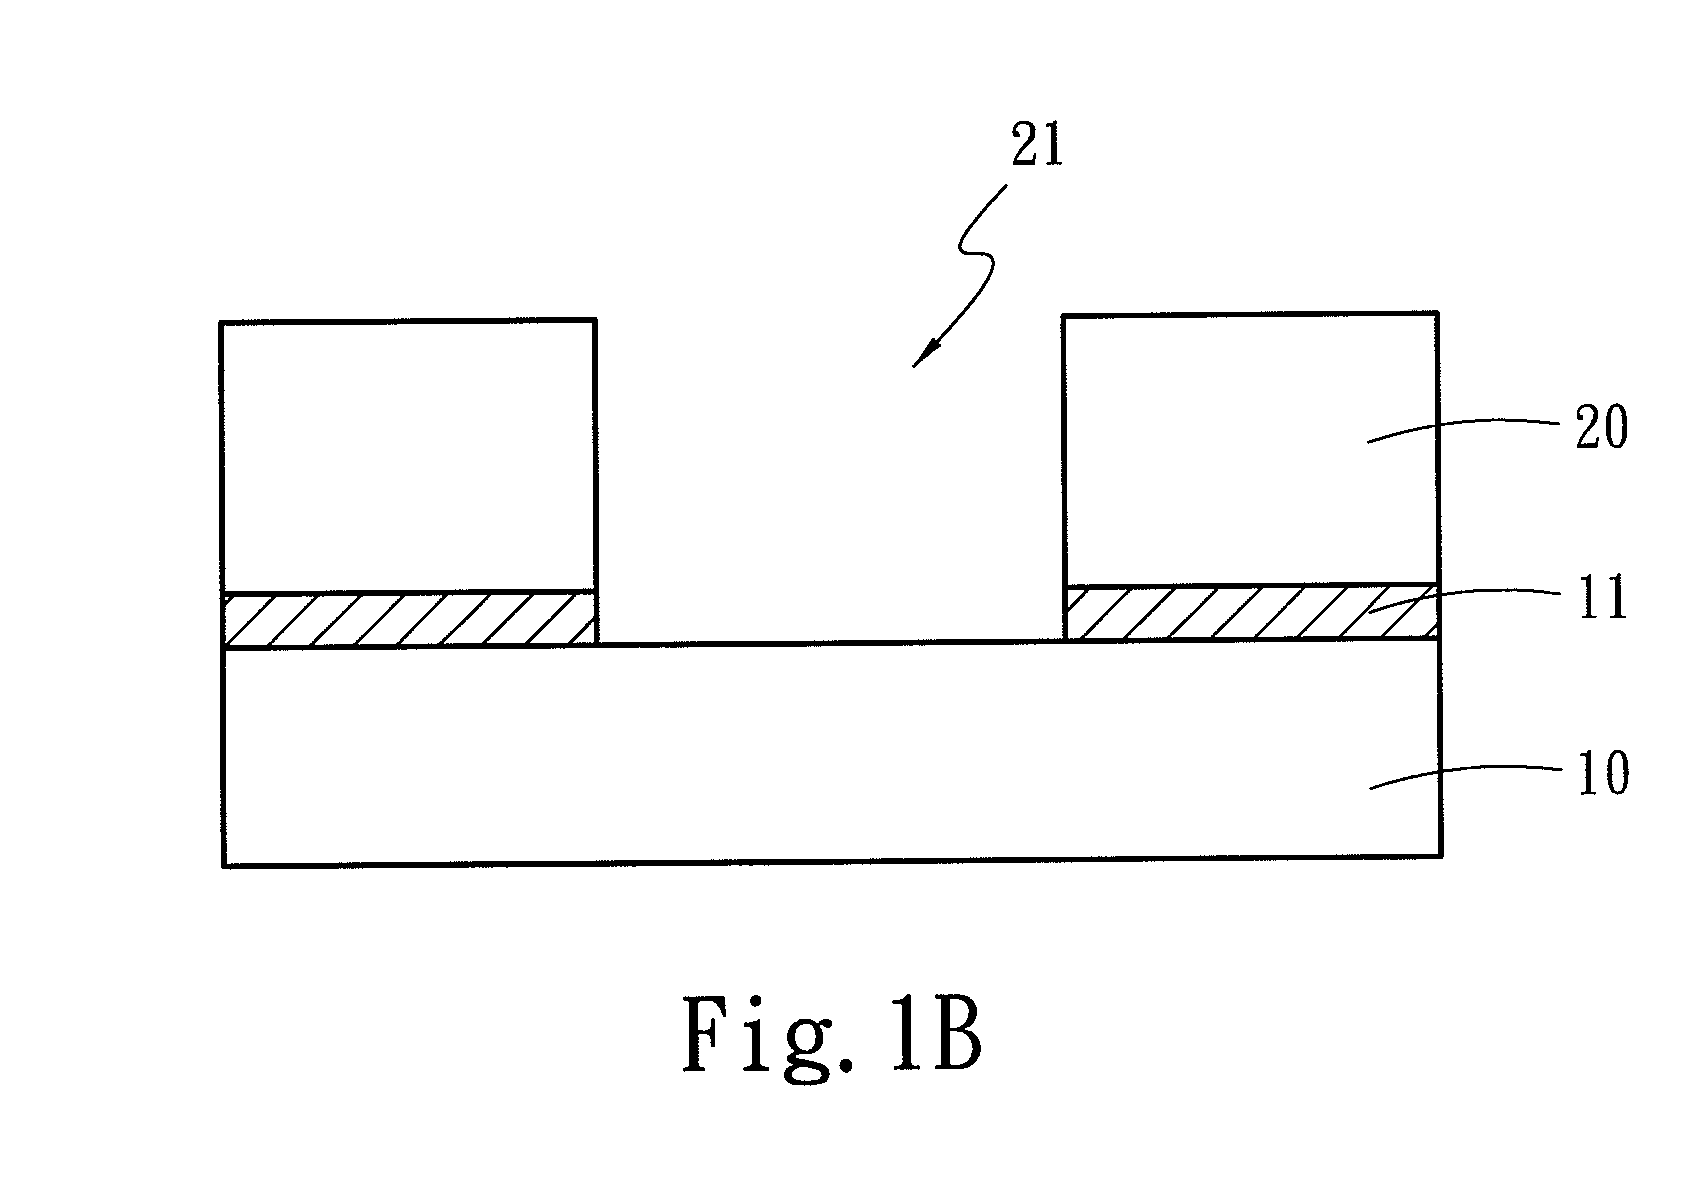 Method for fabricating interconnections with carbon nanotubes